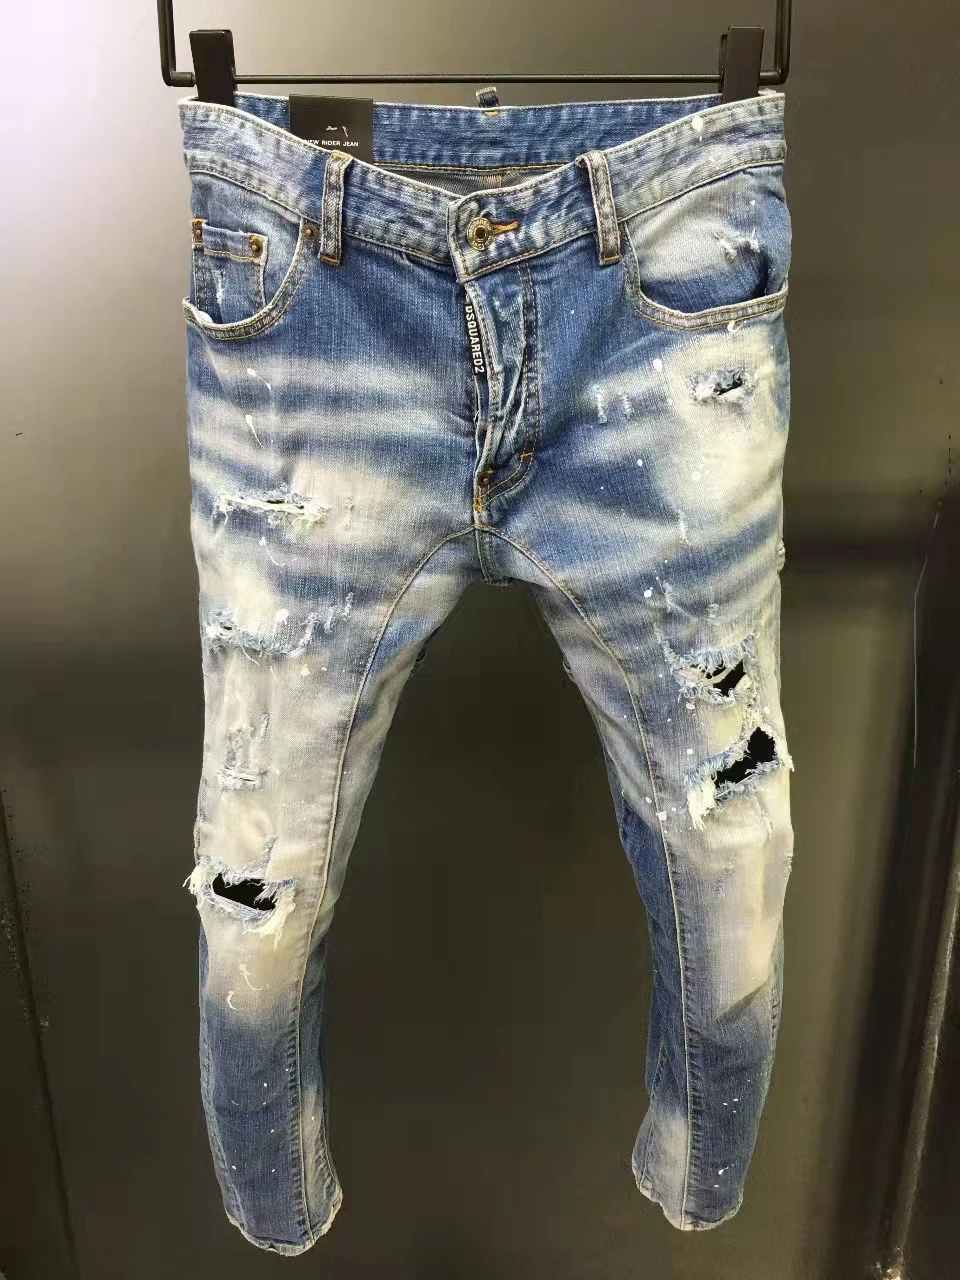 

Dsquared2 Women's/Men's Hole Ripped Ink Jet Do Old Scratched Fashion Pencil Pants Jeans Wreck cave denim jeans A220#